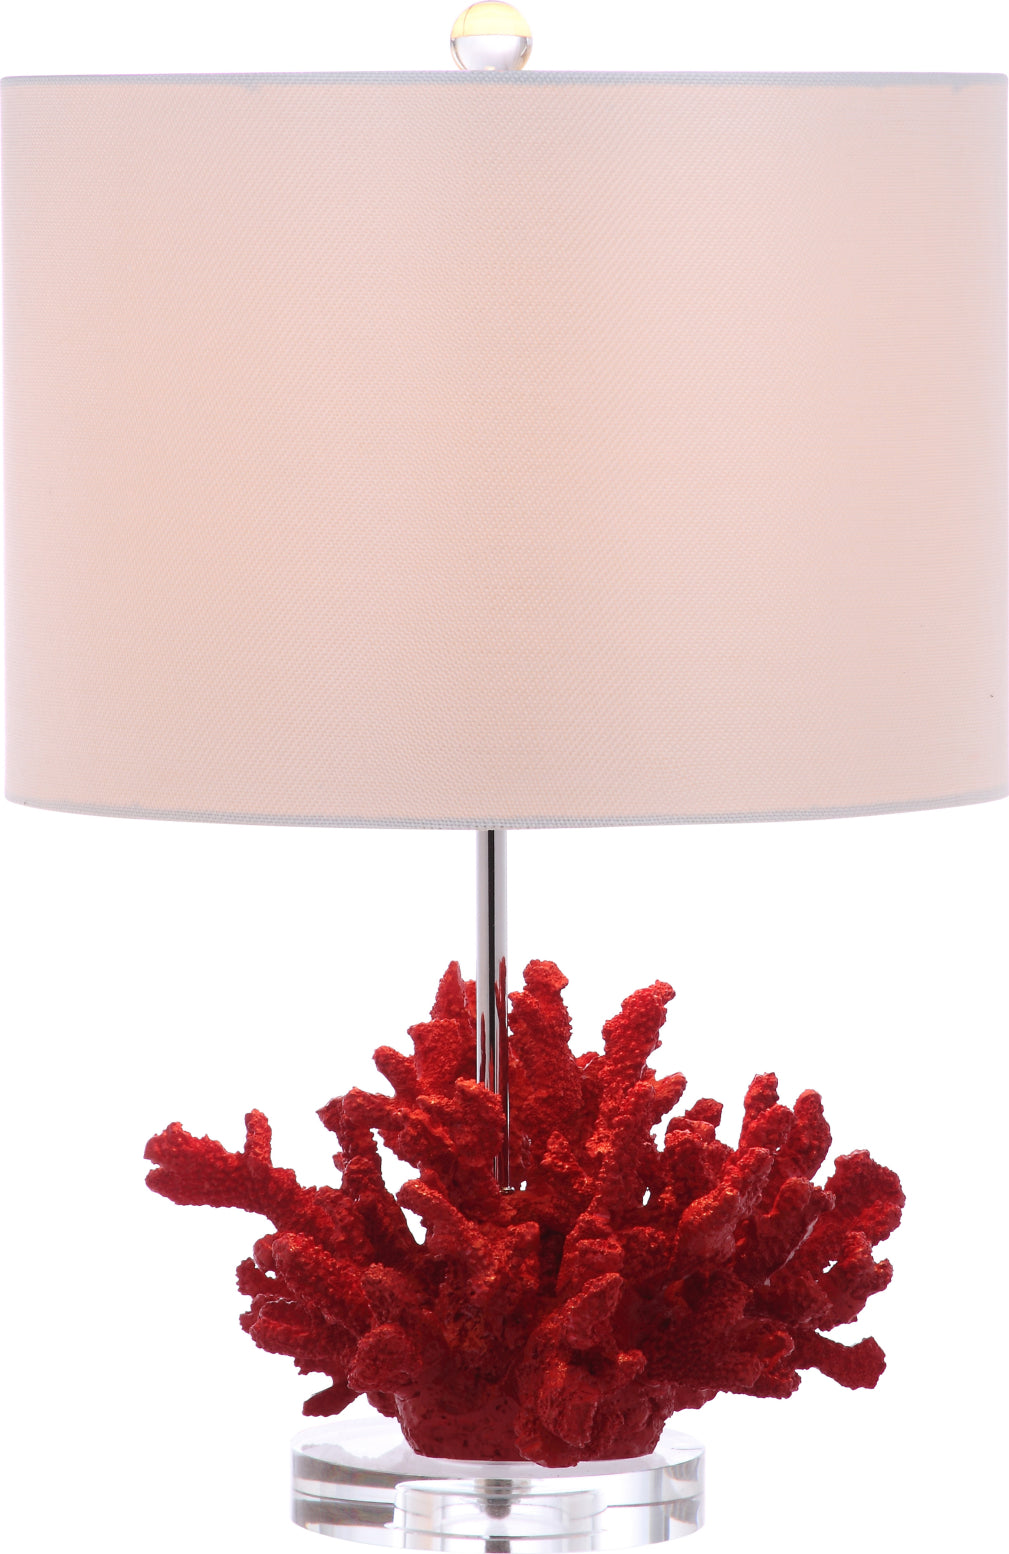 Safavieh Coral Reef 2125-Inch H Table Lamp Red main image